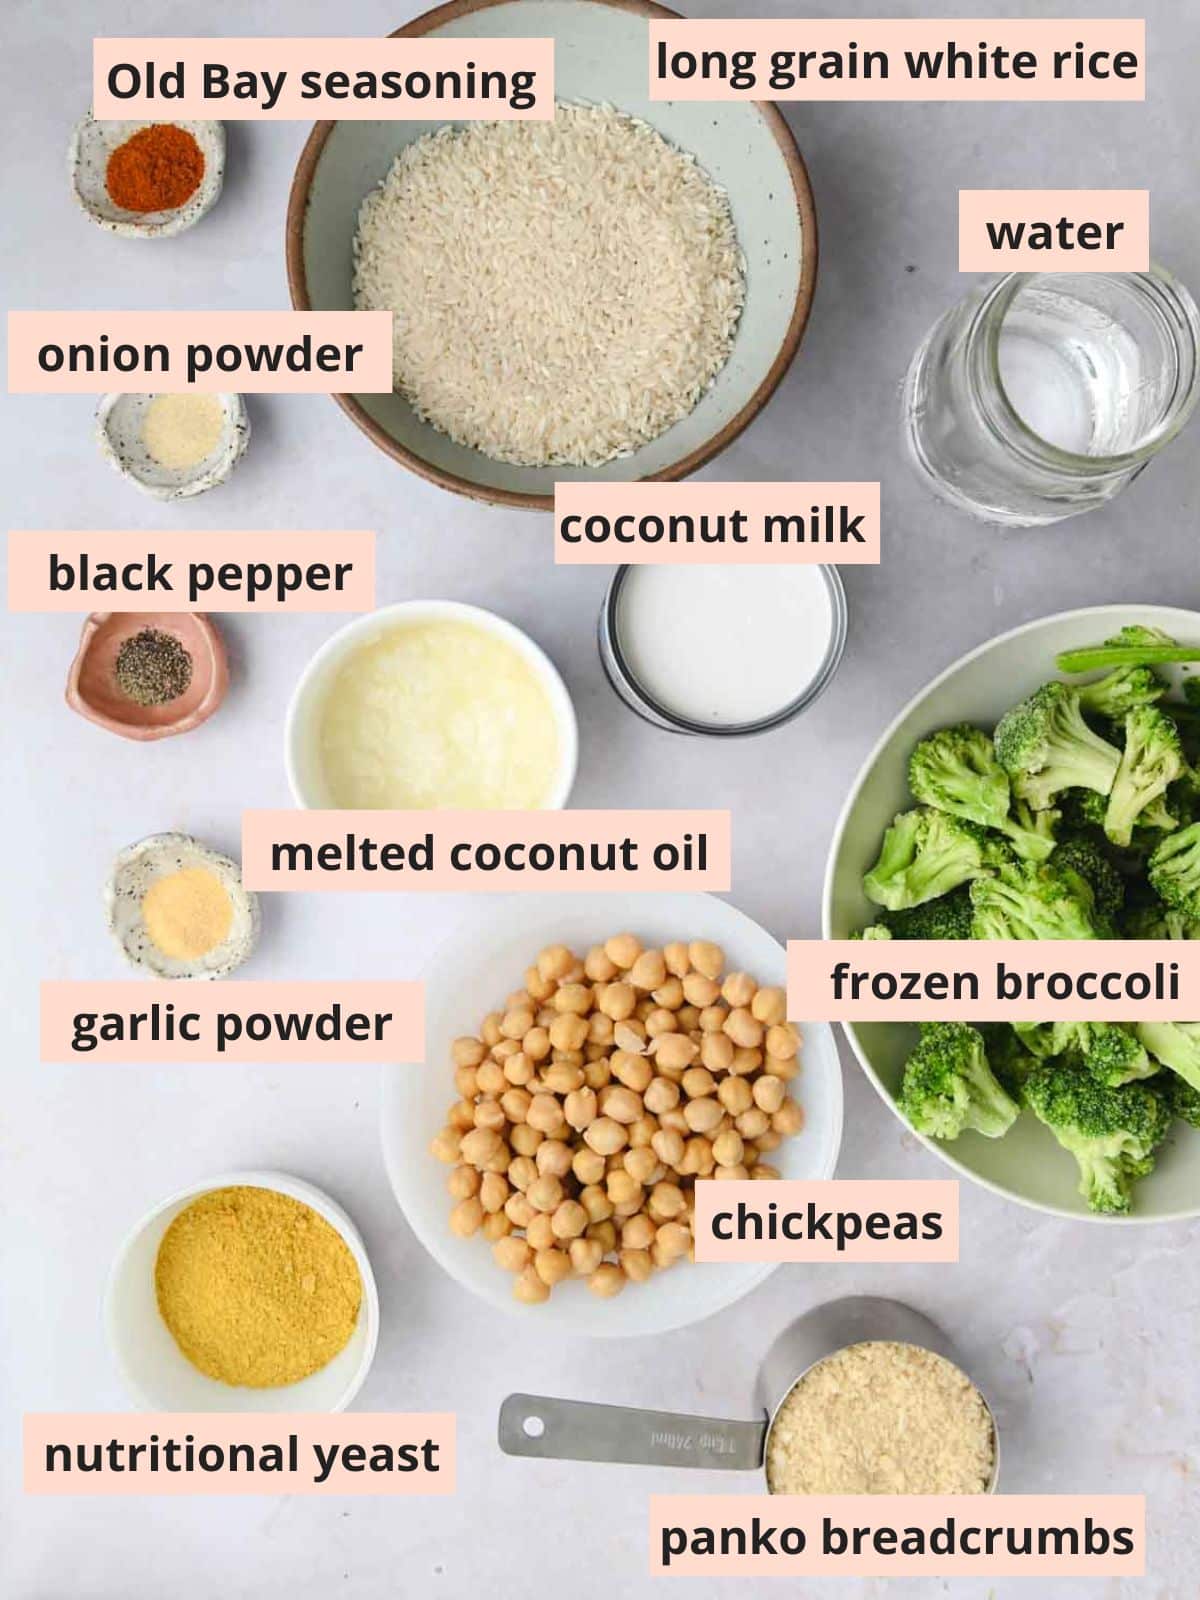 Labeled ingredients used to make broccoli rice casserole.